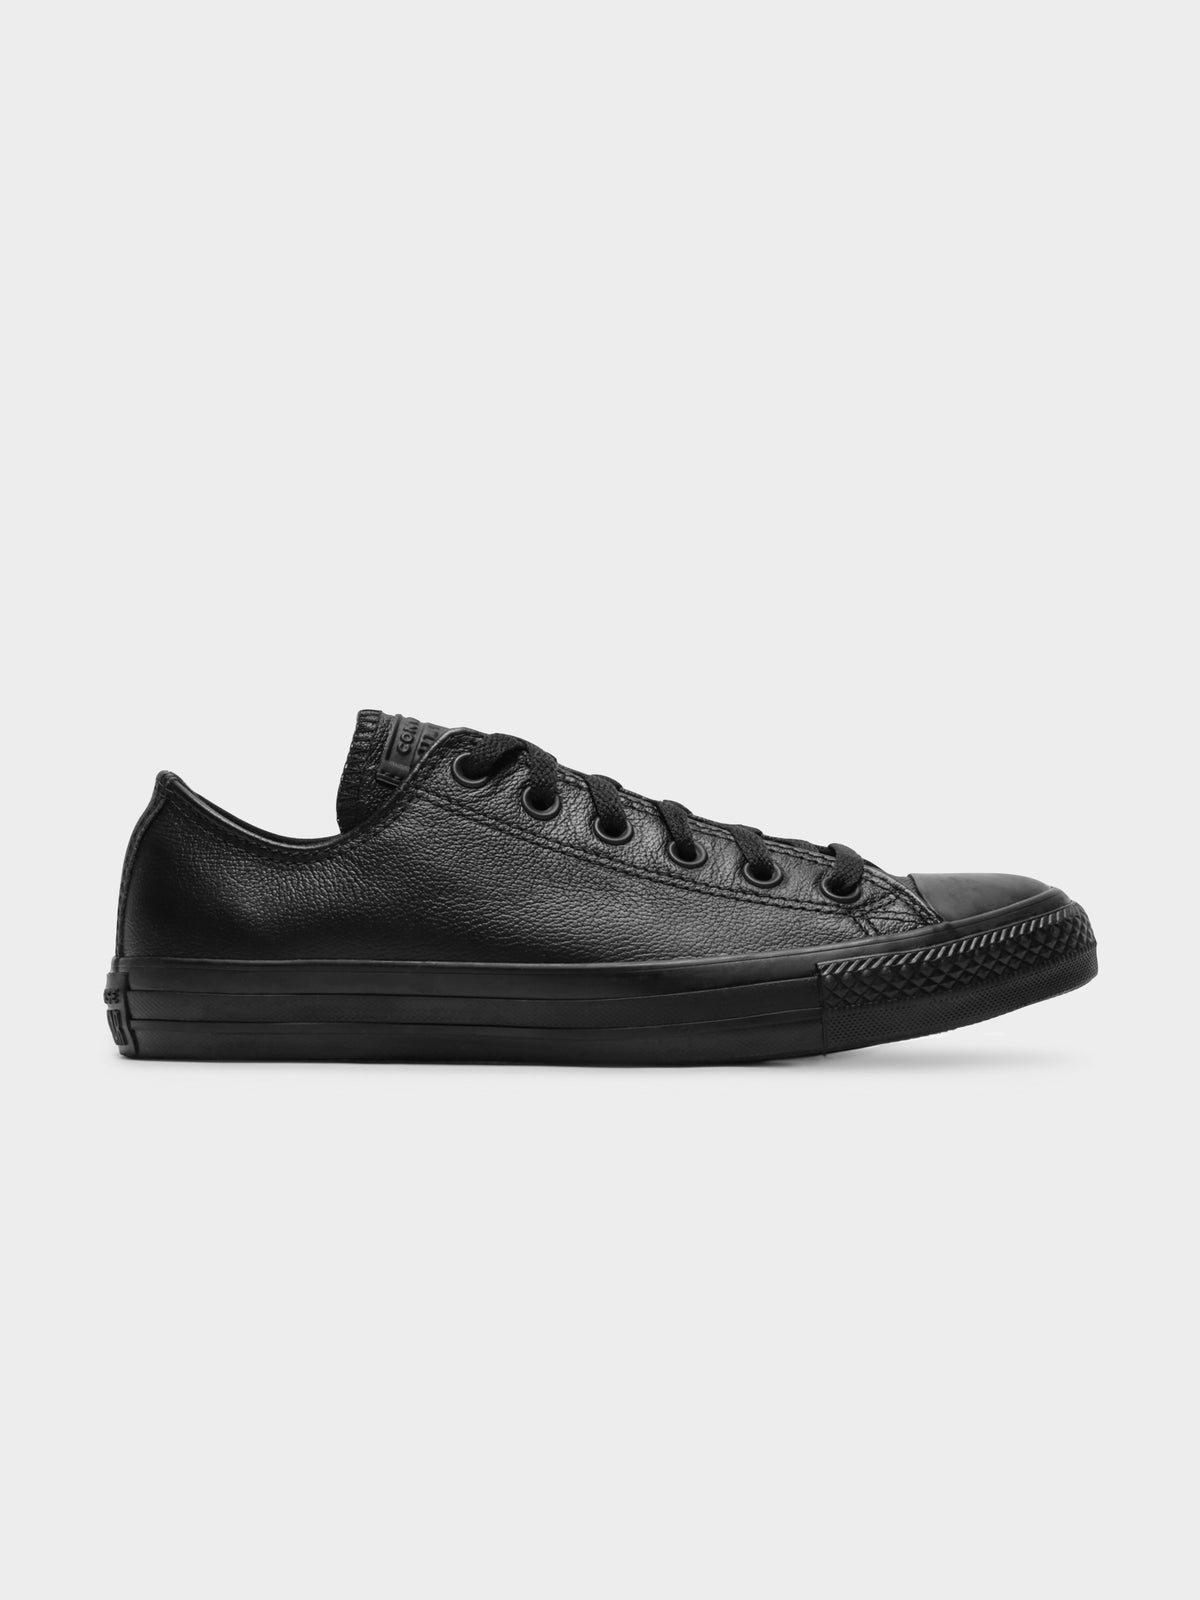 Unisex Chuck Taylor All Star Low Leather Mono Sneakers in Black